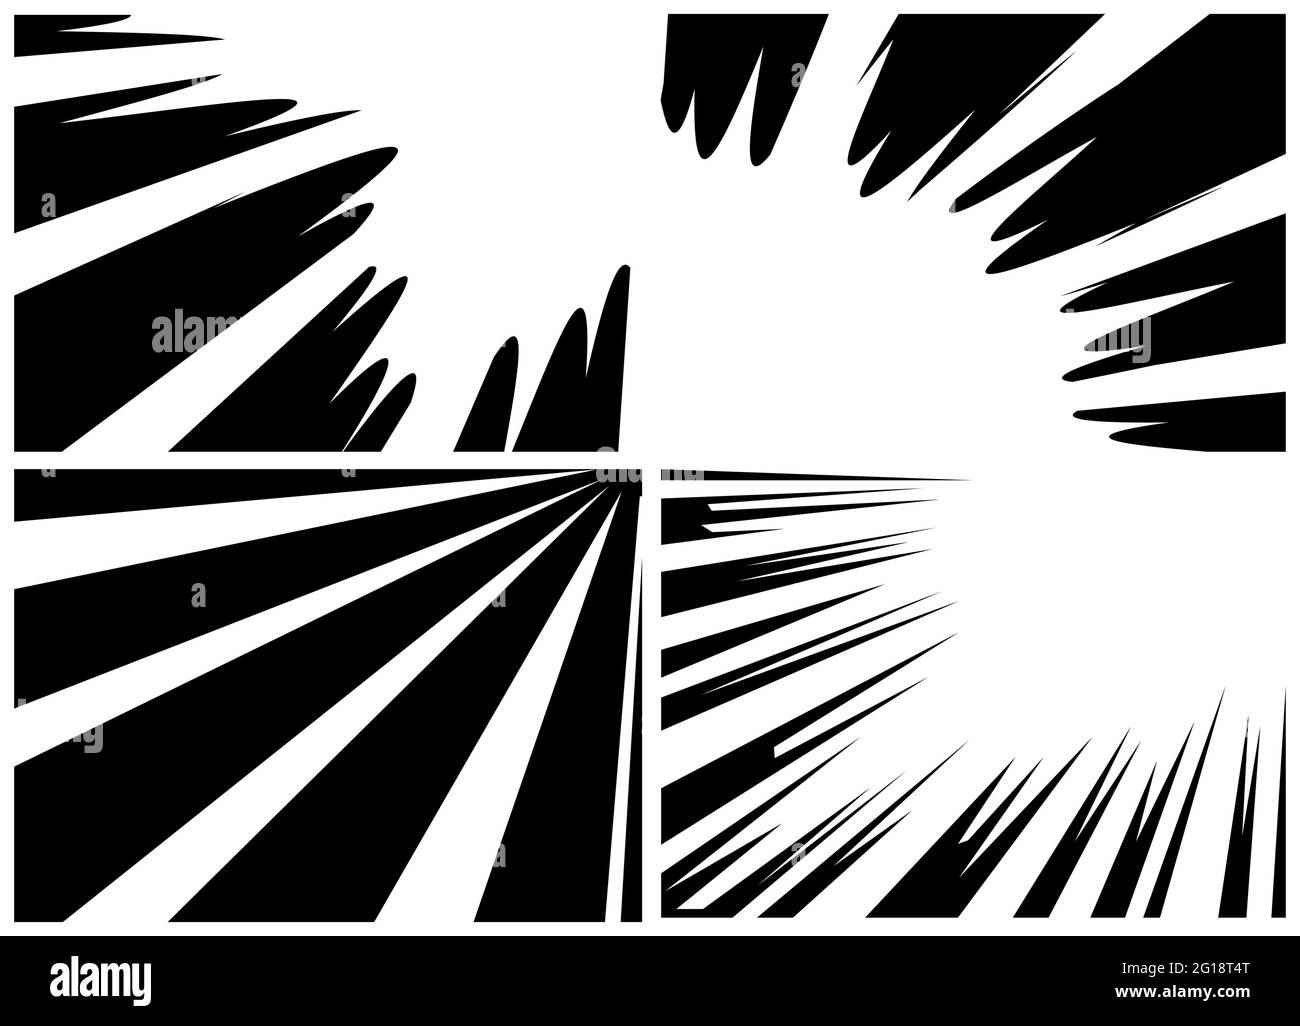 simple black and white background design